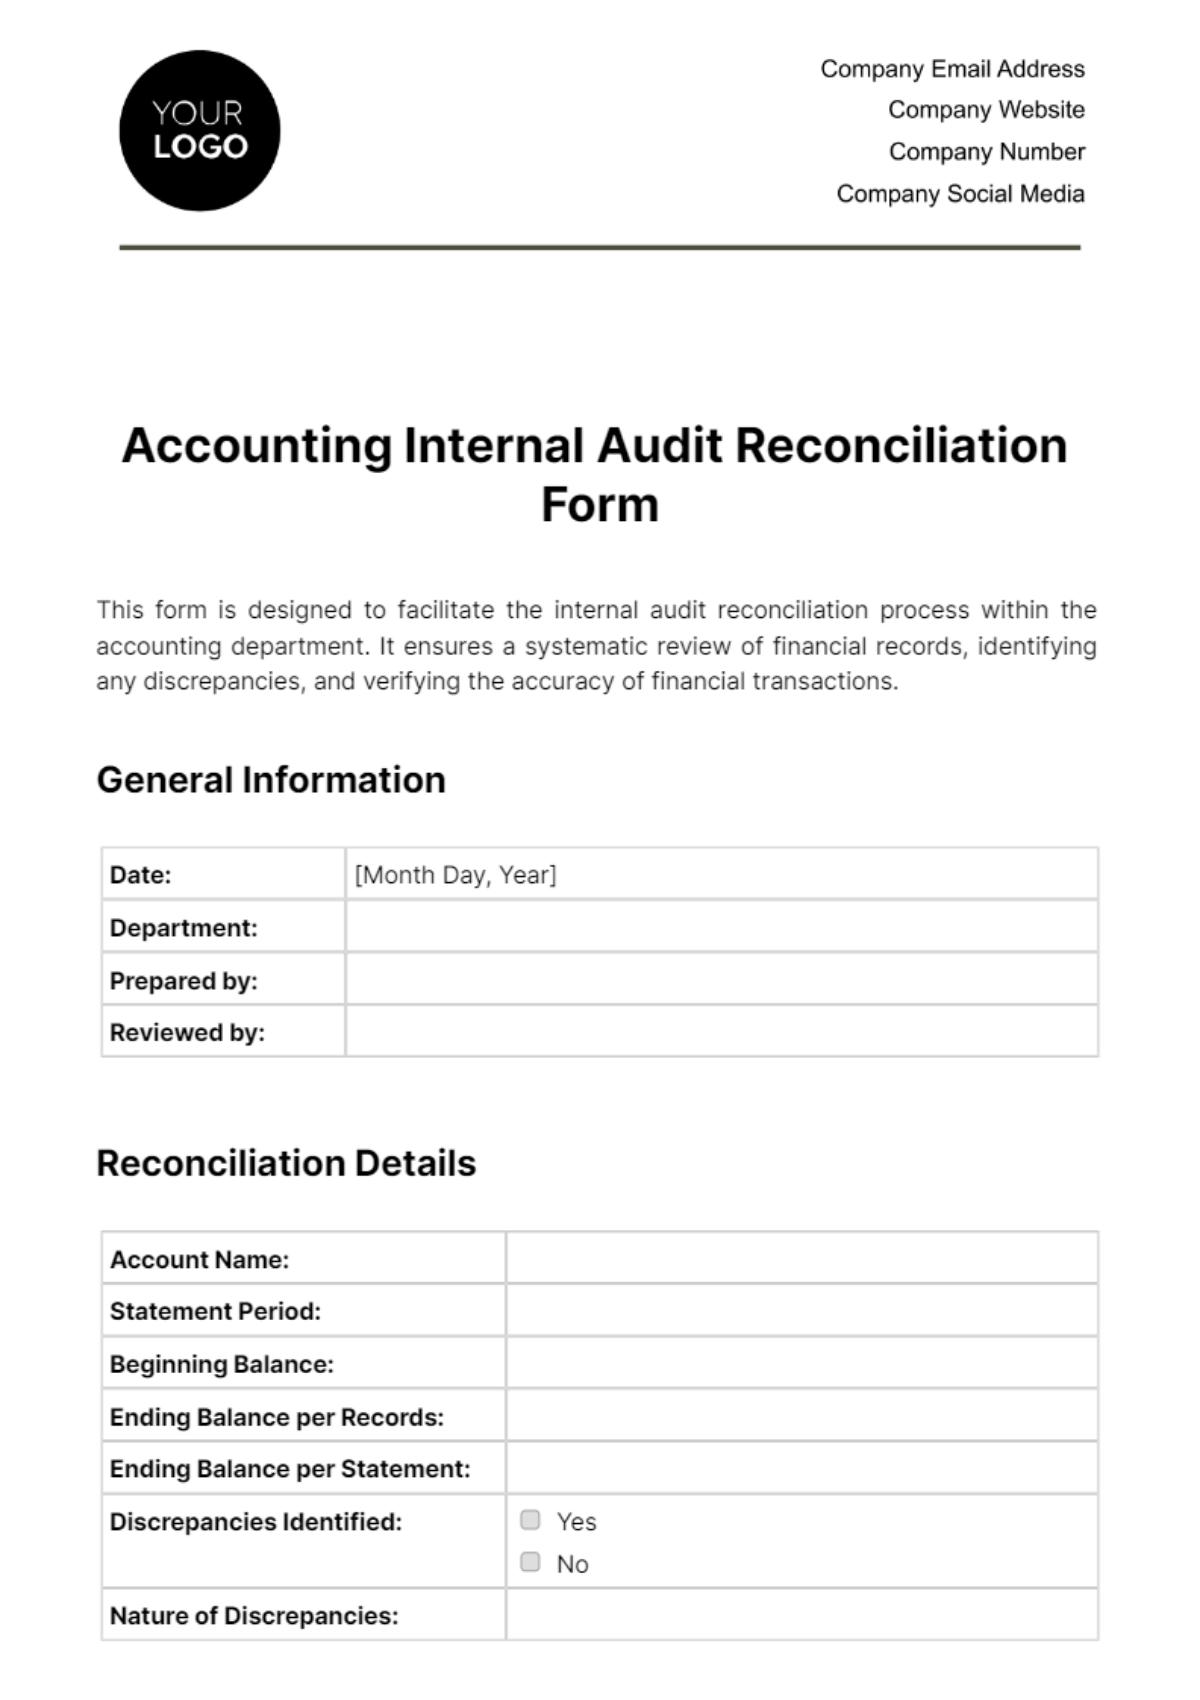 Accounting Internal Audit Reconciliation Form Template